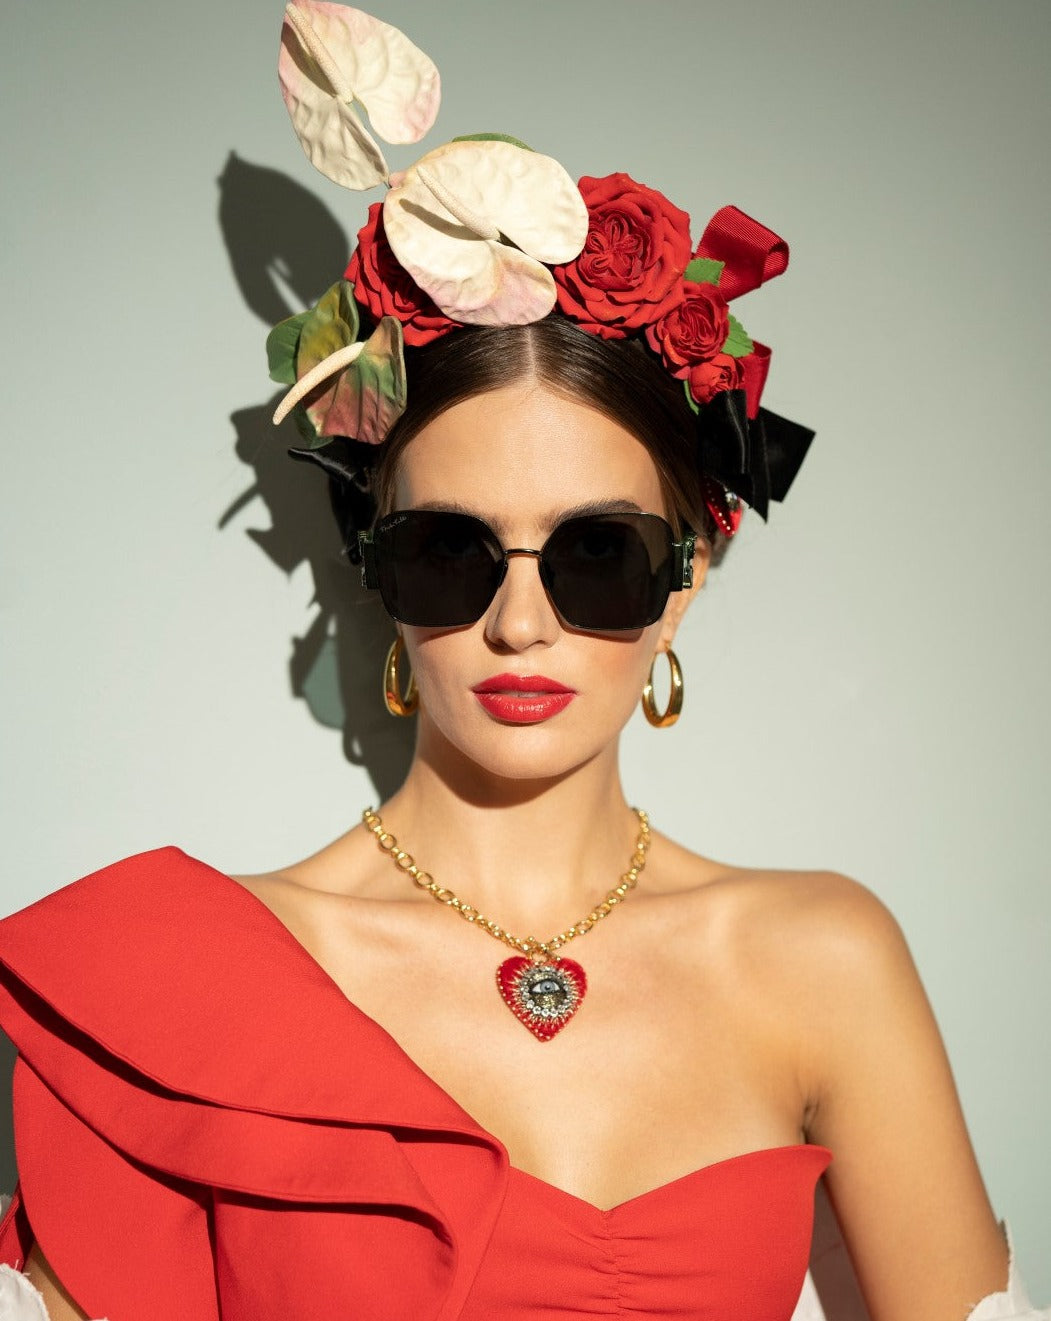 A woman wearing oversized black sunglasses with 100% UVA &amp; UVB protection, a red off-the-shoulder dress with a large ruffle, and large gold hoop earrings. Her hair is adorned with red roses and white flowers, and she sports red lipstick and a gold-plated stainless steel necklace with a heart-shaped pendant (**Frida Mask by For Art&#39;s Sake®**).